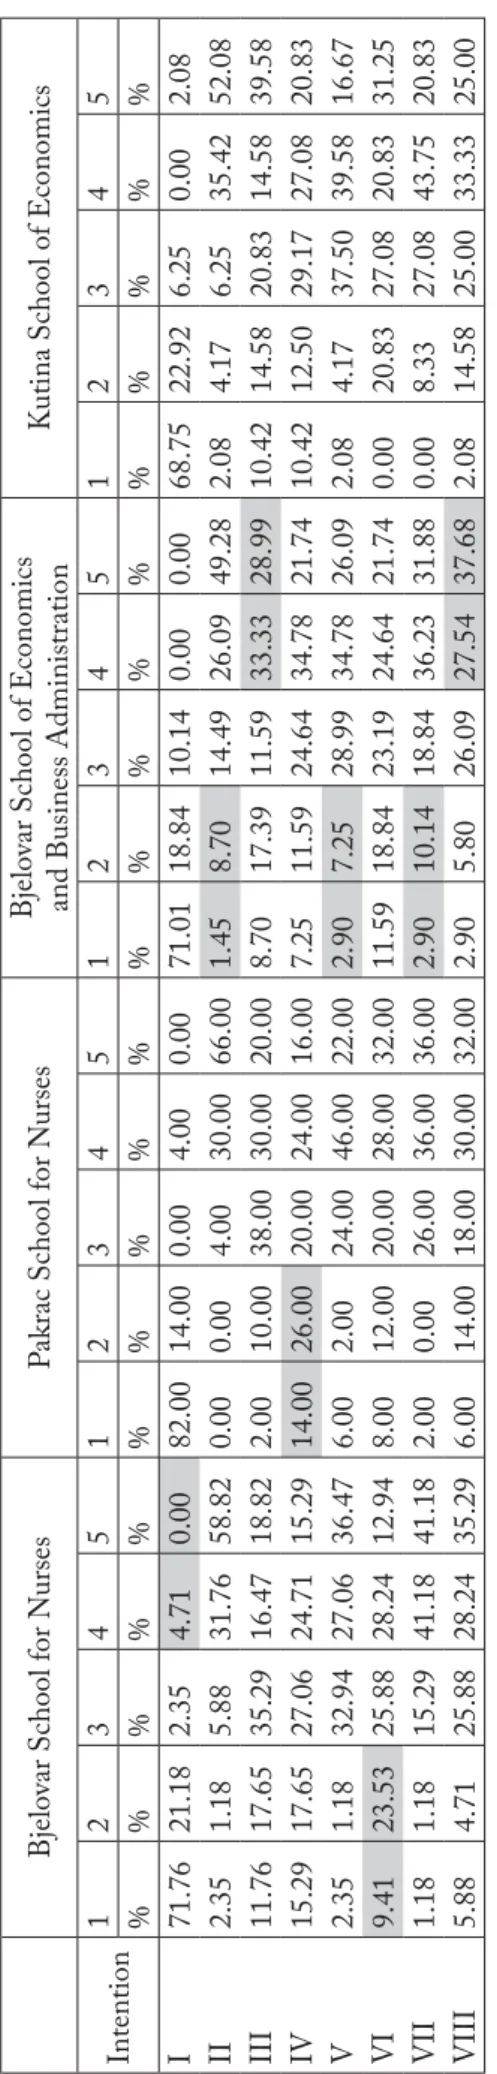 Table 1 shows the participant data from four  schools regarding intention items, expressed as  fre-quencies and percentages